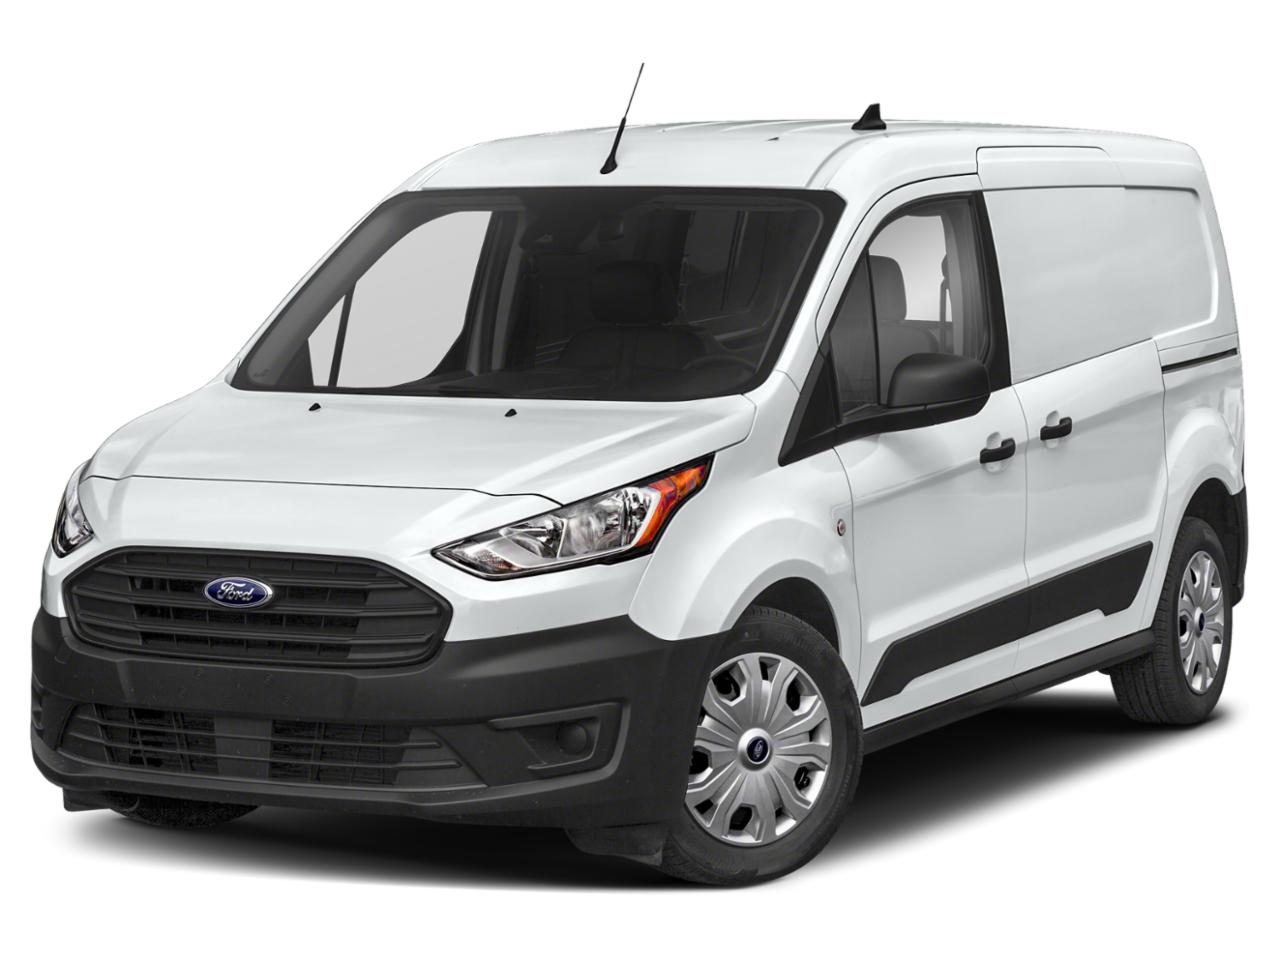 2022 Ford Transit Connect Van Vehicle Photo in Saint Charles, IL 60174